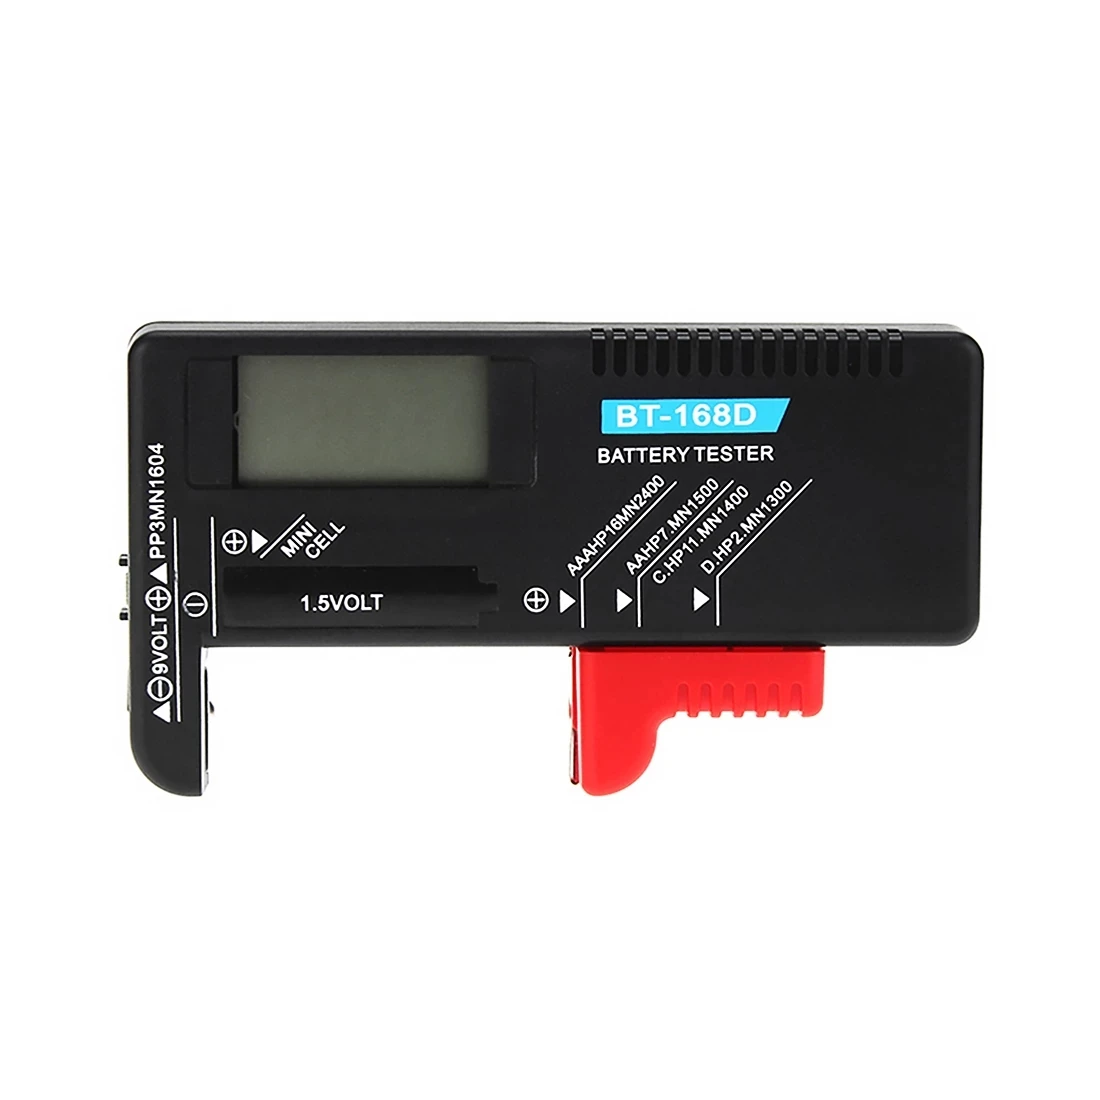 BT168 Battery Tester Checker Button Cell Volt Tester Tool For AA/AAA/C/D/9V/1.5V 